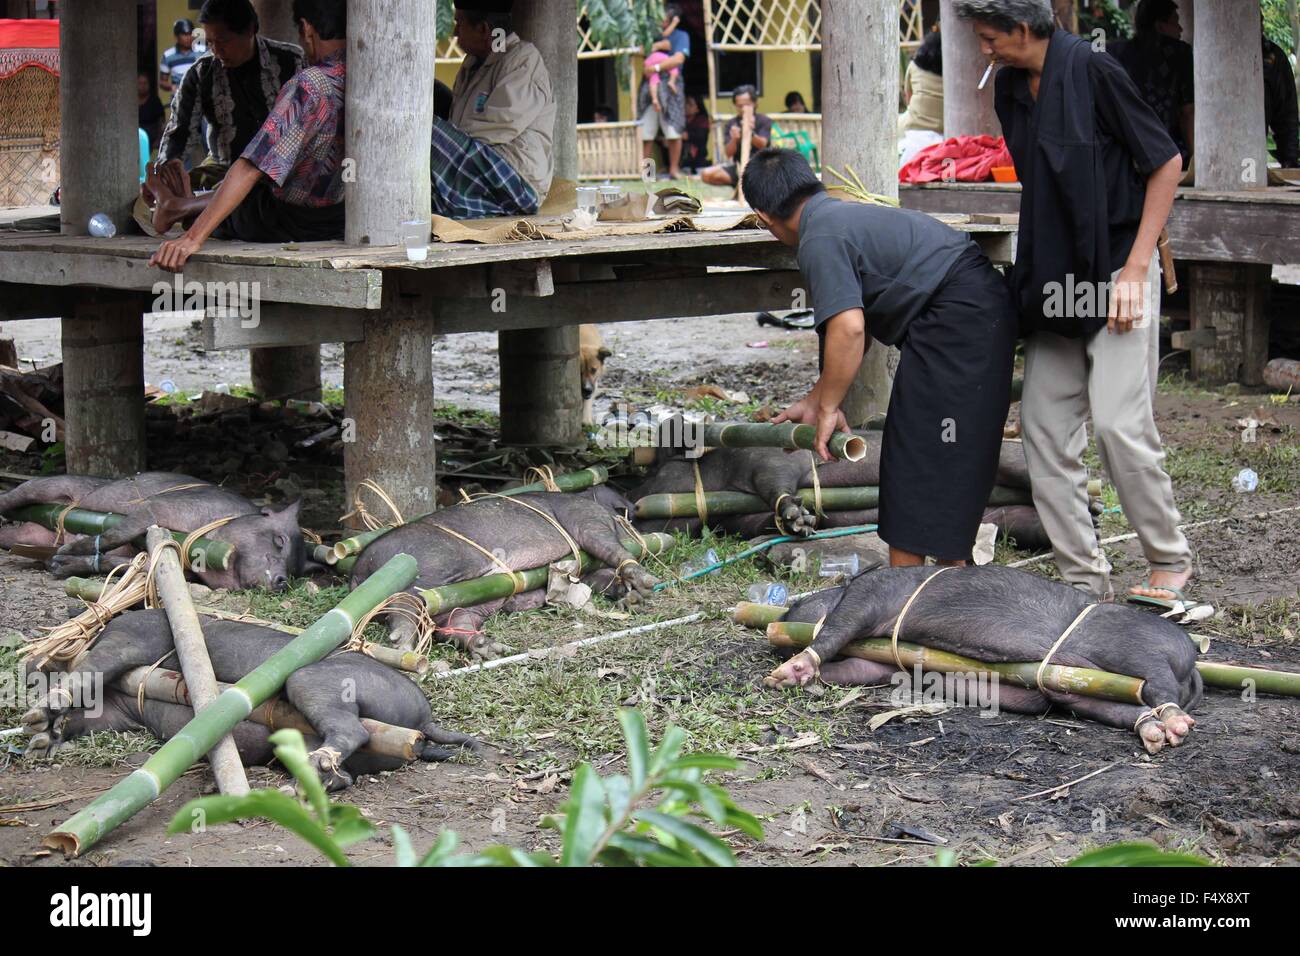 TANA TORAJA, JULY 3 2012: Porks  tied to bamboo canes before their being sacrificed in a funeral ceremony in Tana Toraja, Indone Stock Photo